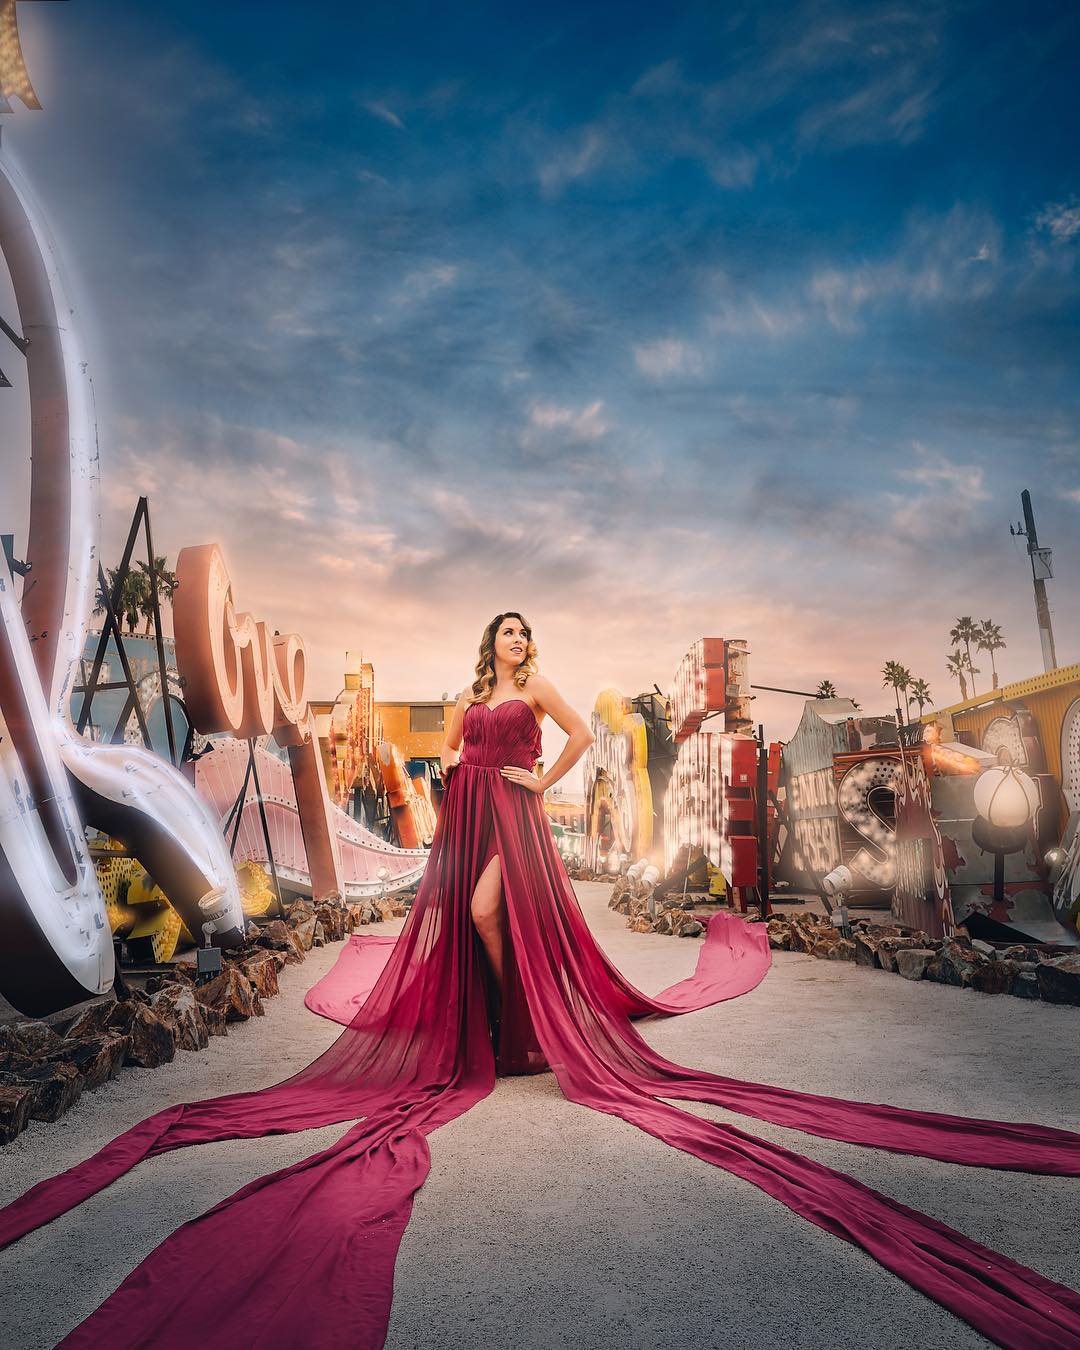 A woman dressed in wine colored gown in a well lit road